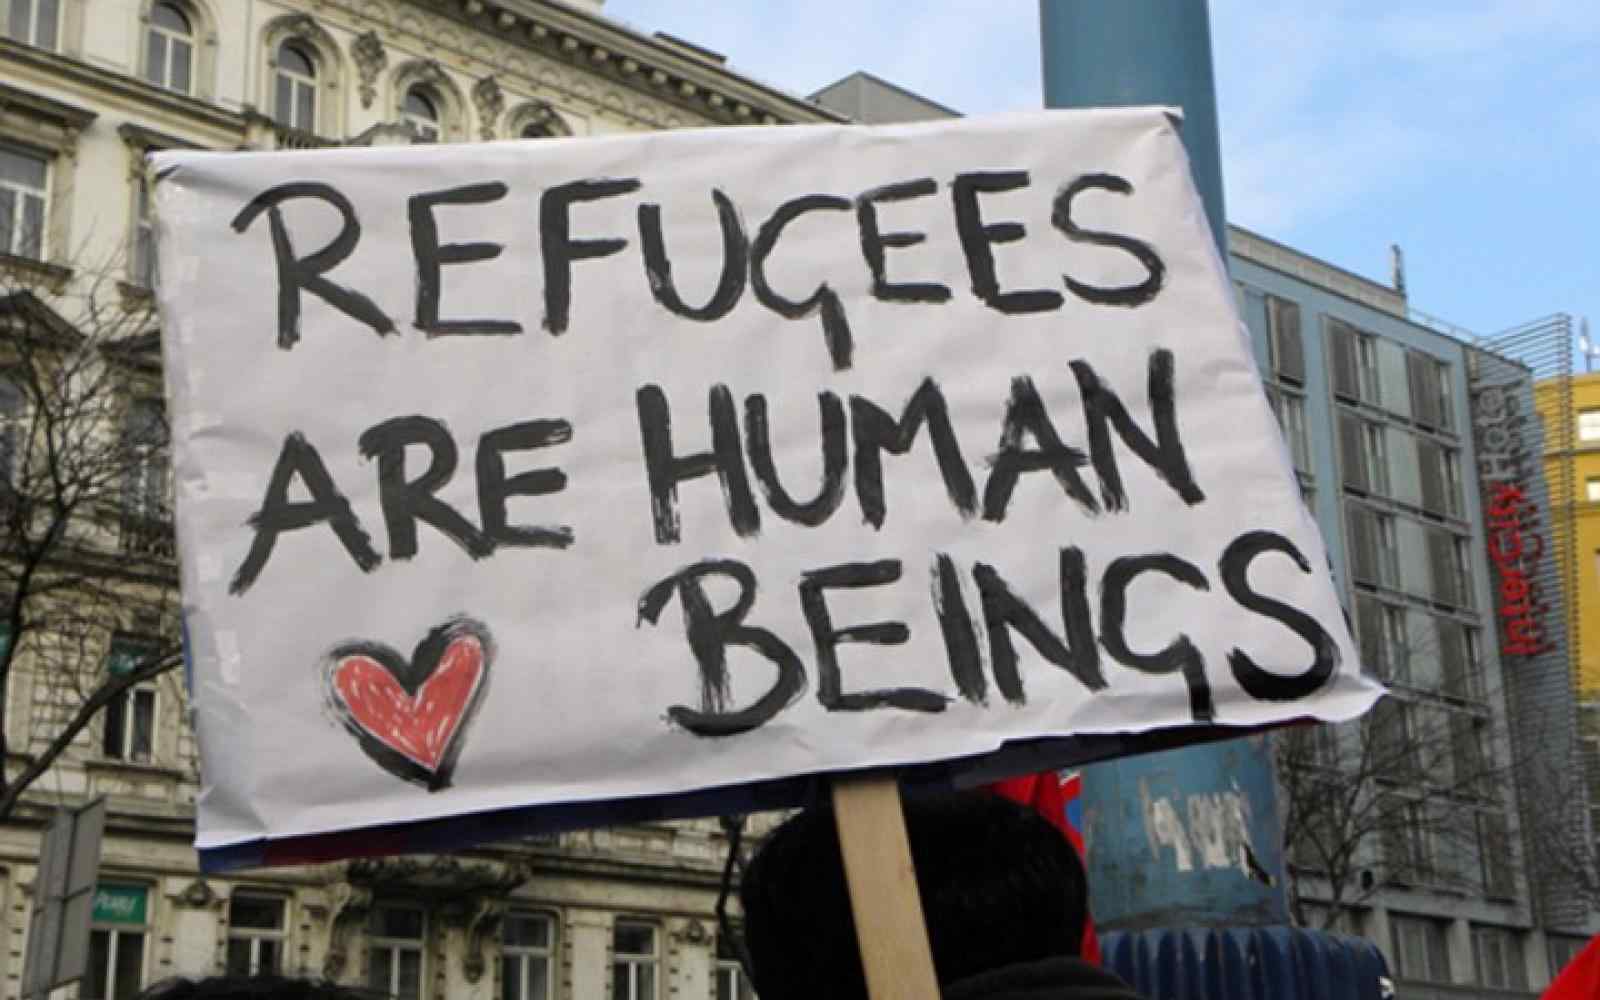 Refugees are human beings